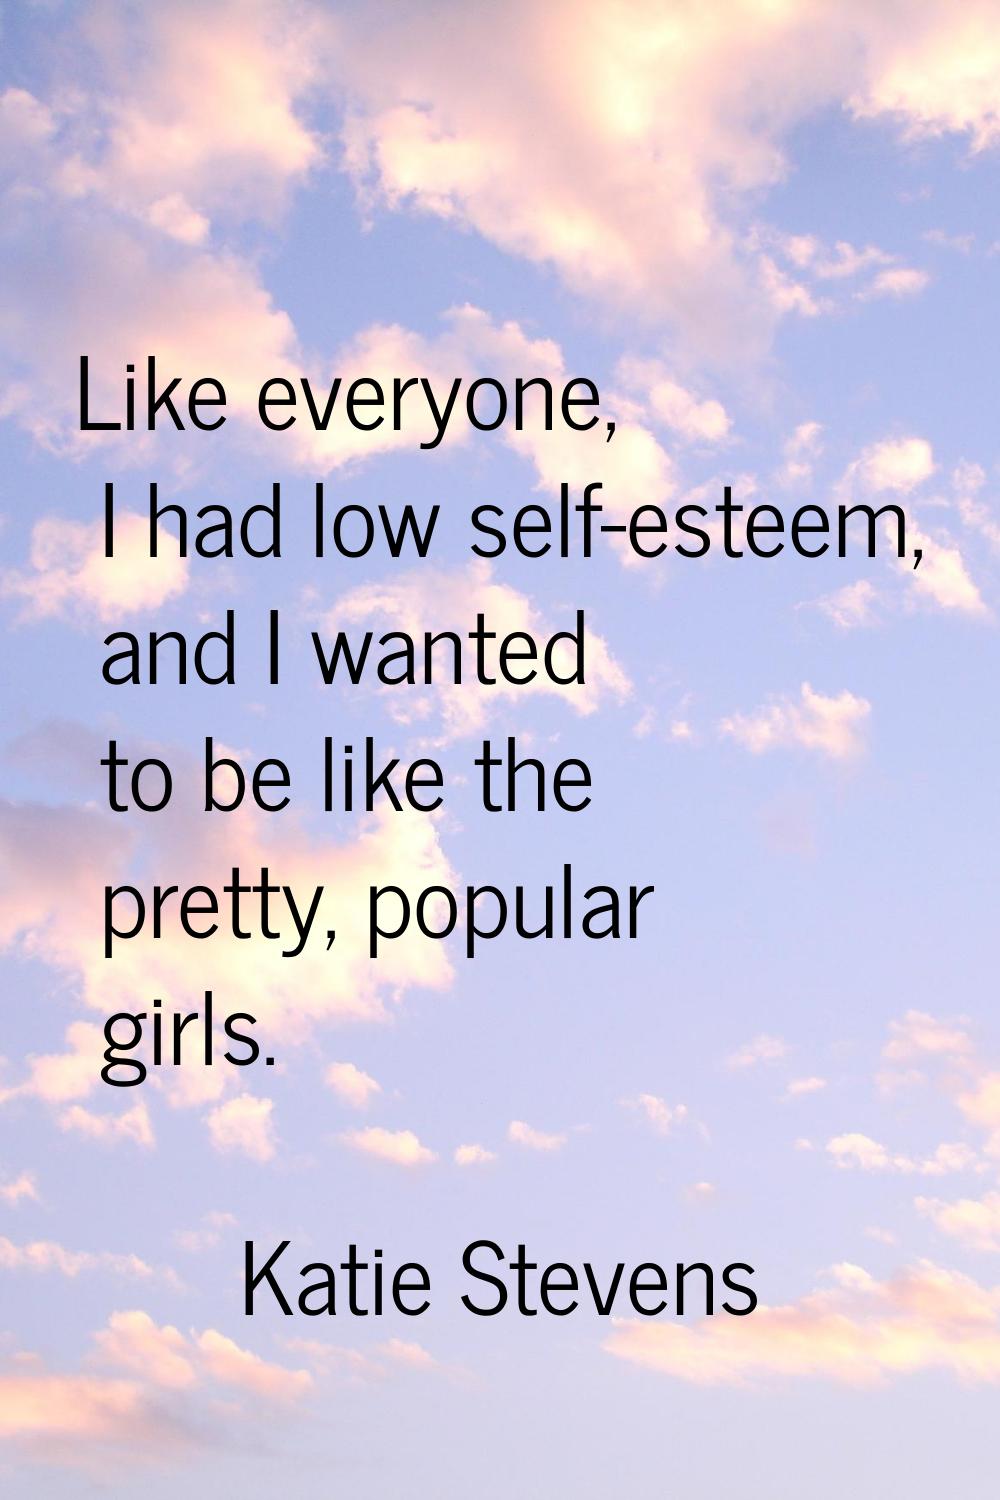 Like everyone, I had low self-esteem, and I wanted to be like the pretty, popular girls.